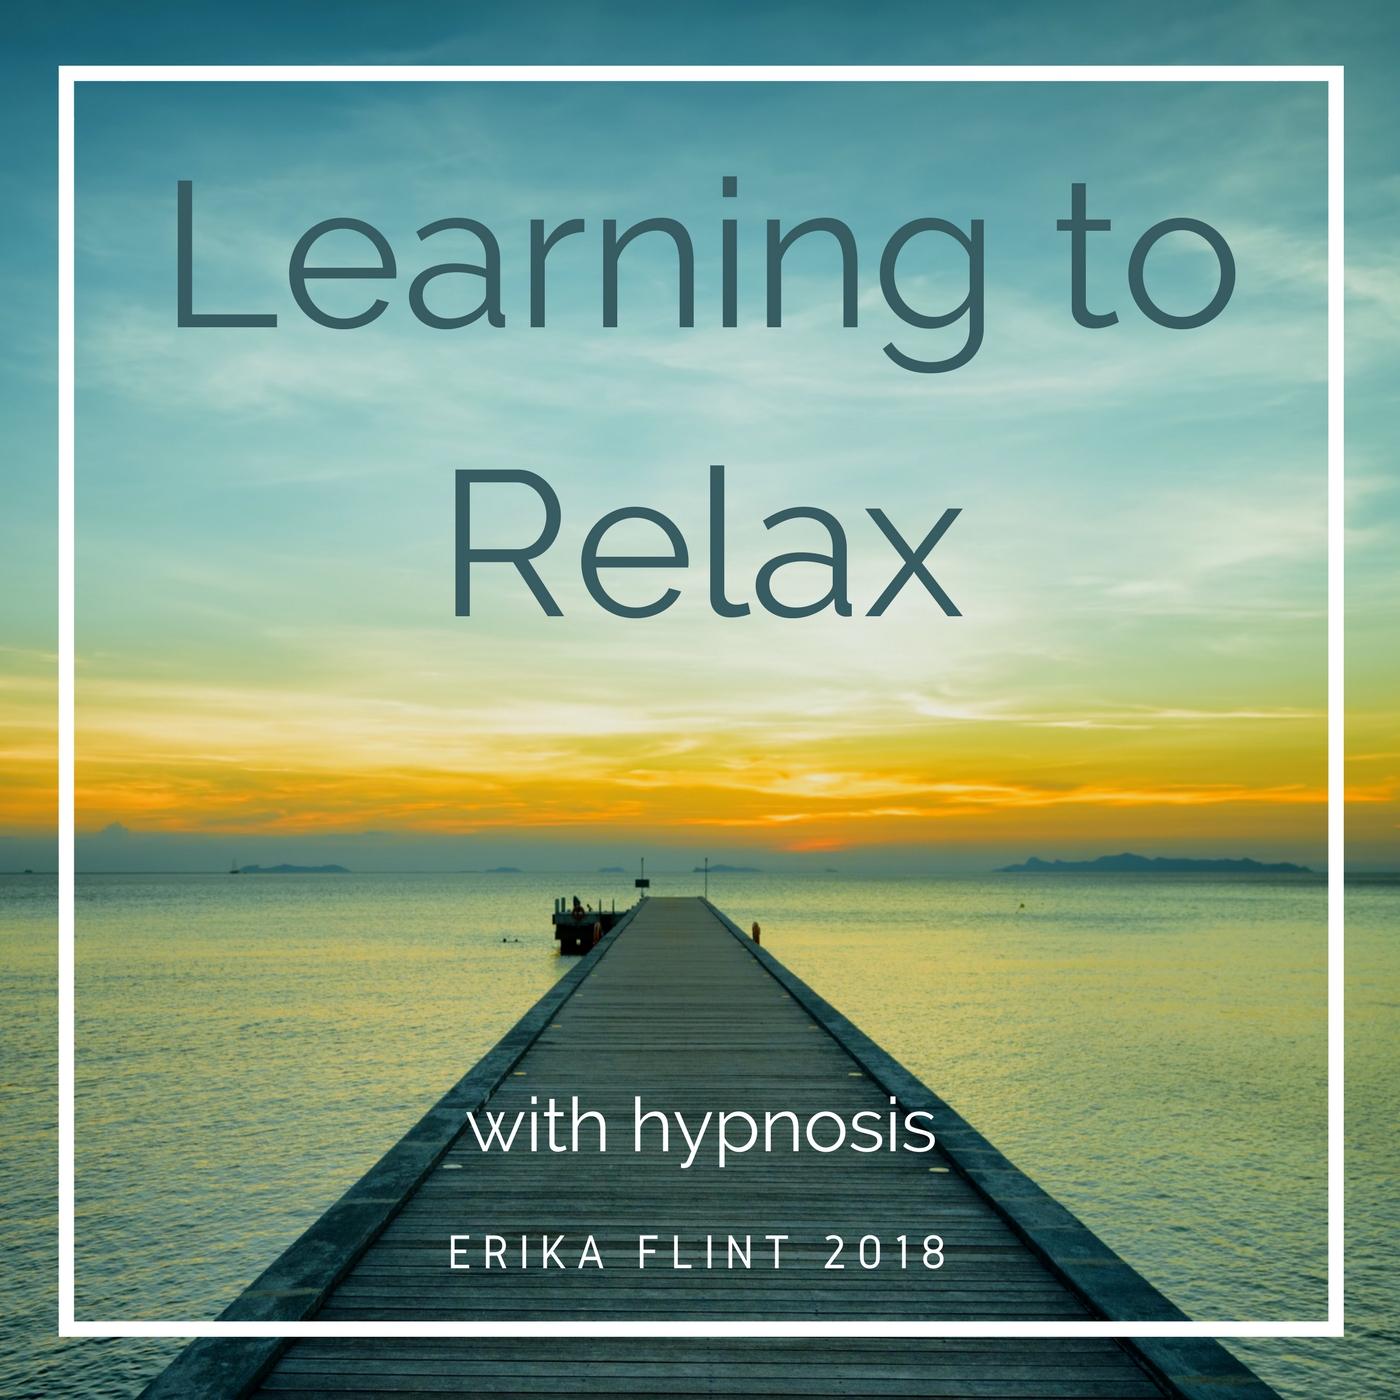 Learning to Relax - what I offer all my clients to begin their journey to success with hypnosis at our center.